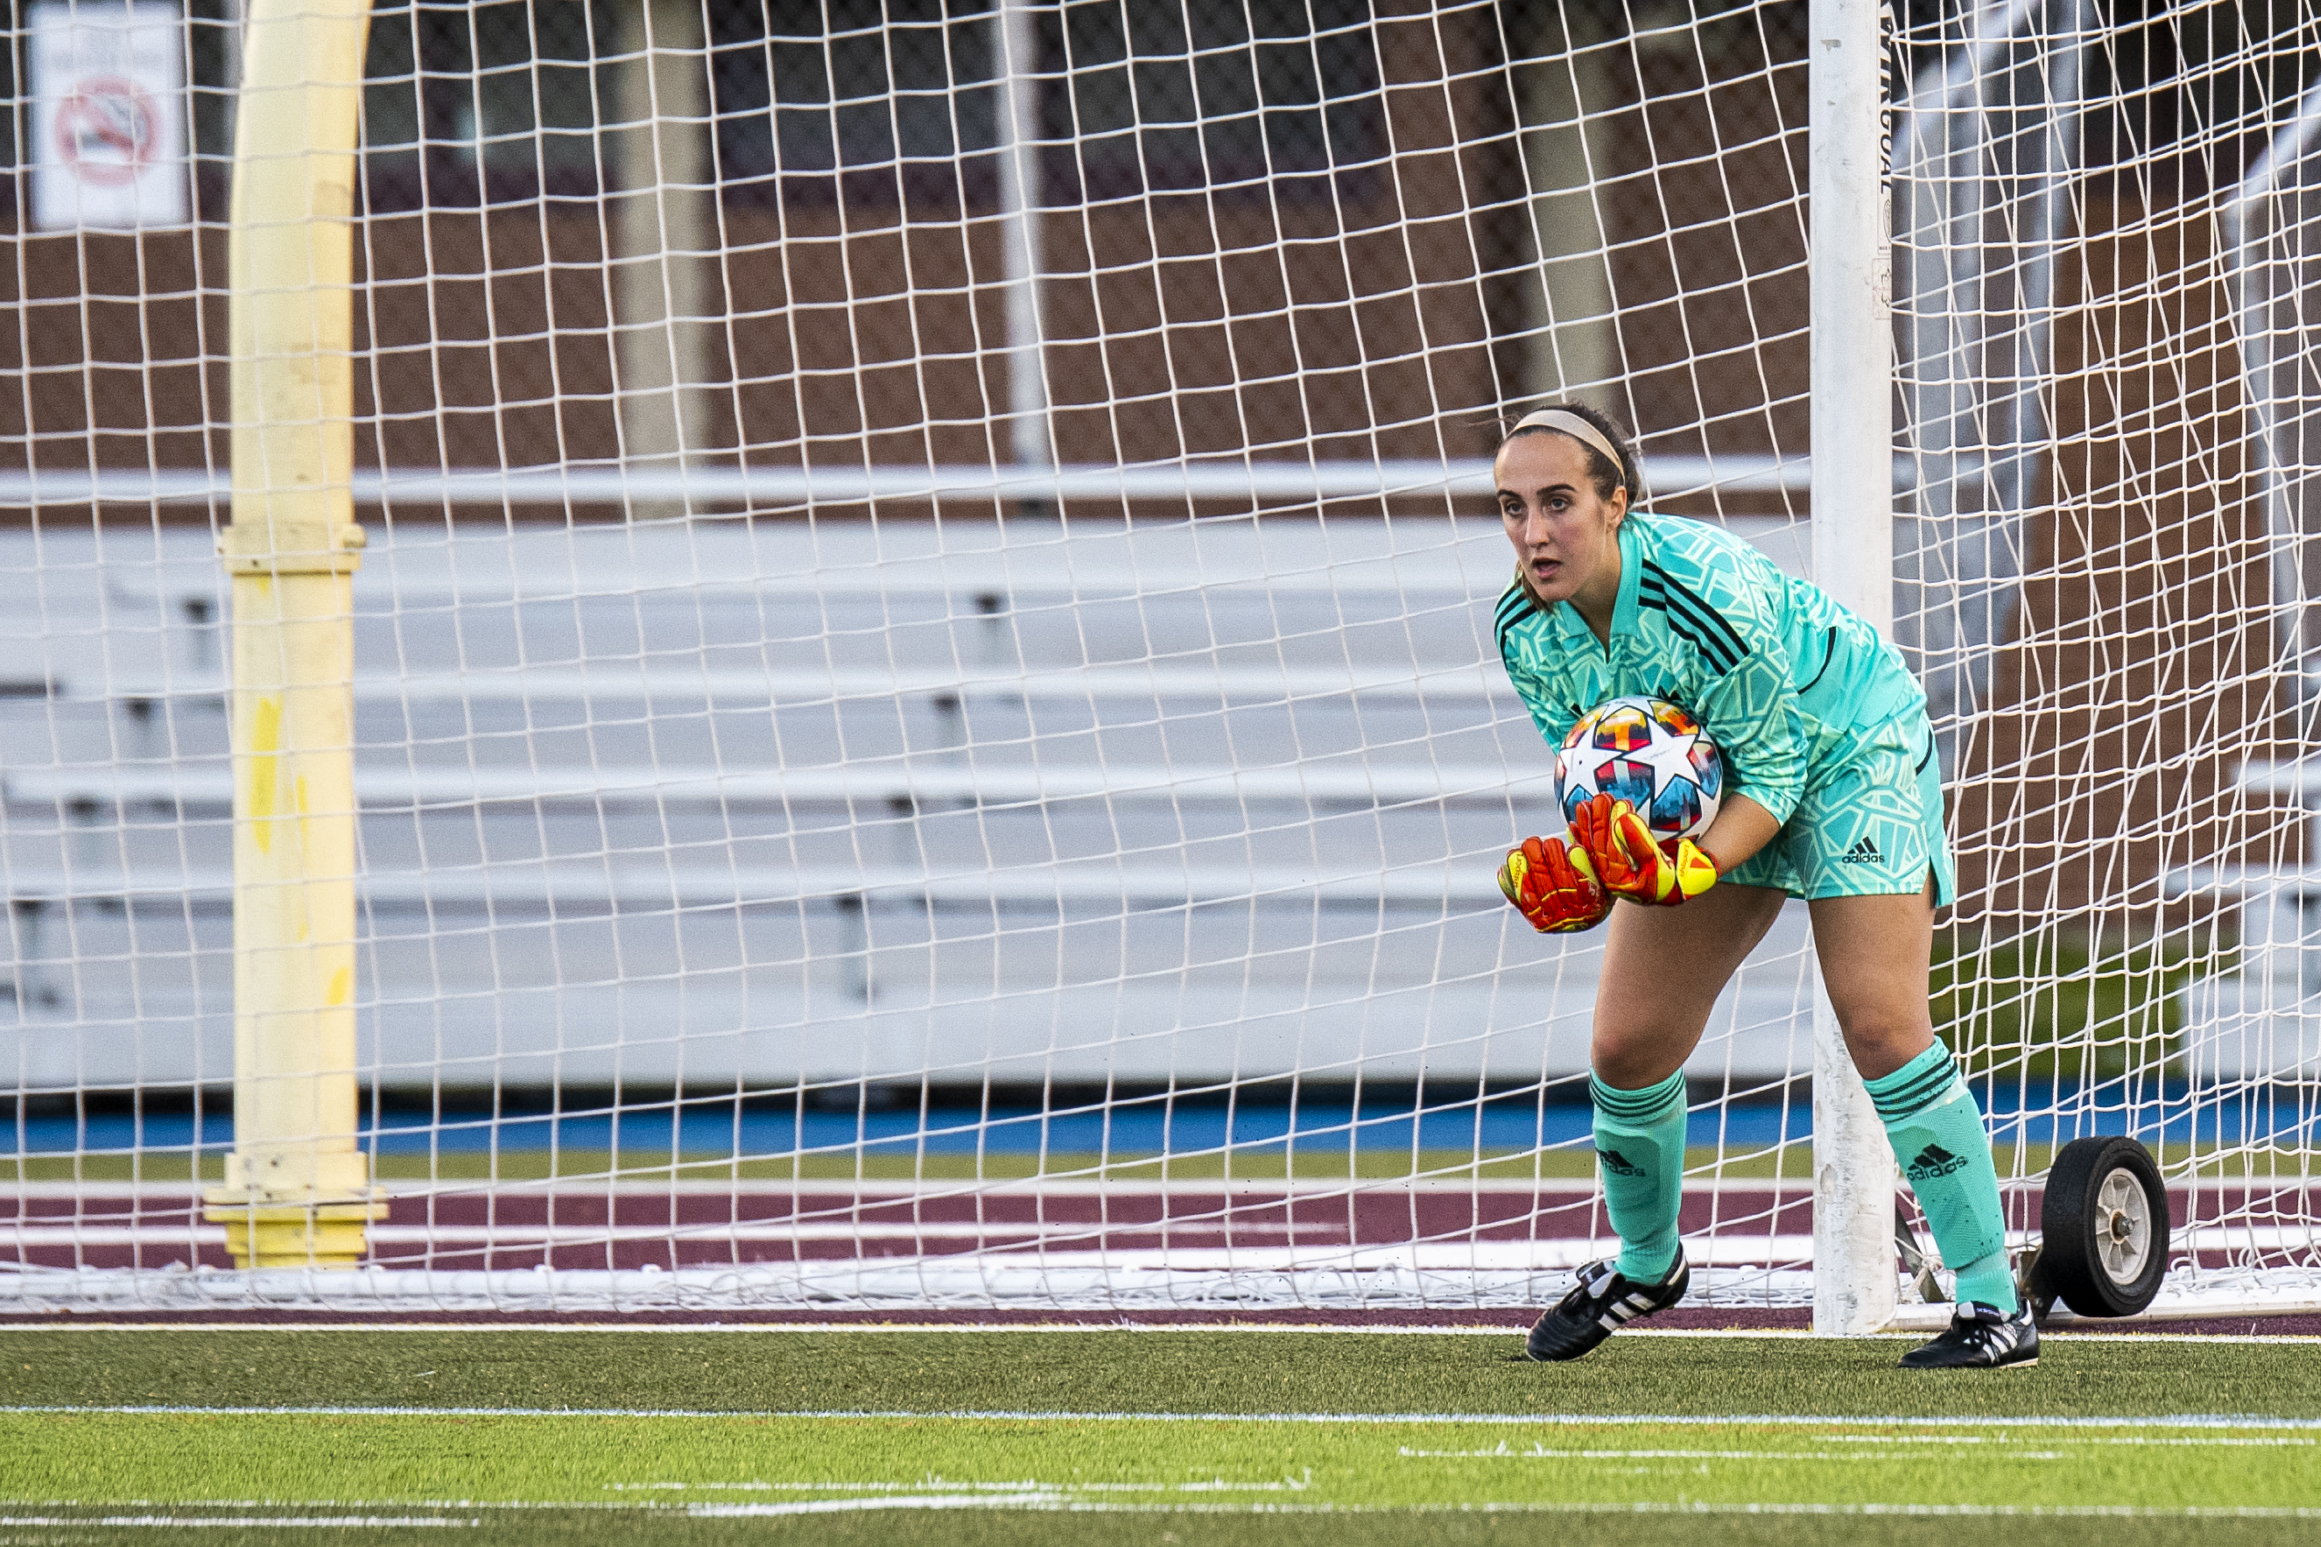 Morrison shines in goal as Huskies defeat REDS 2-0 in Halifax